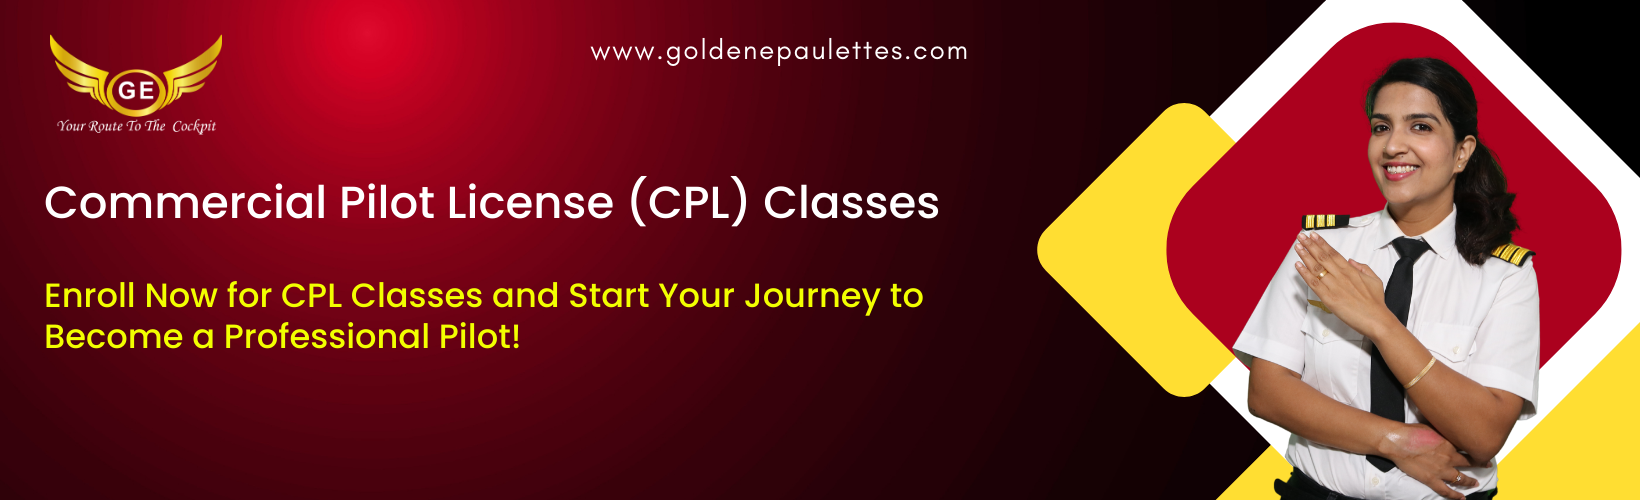 Stay Informed on New Job Openings and Airline Preparation Classes with Golden Epaulettes Aviation